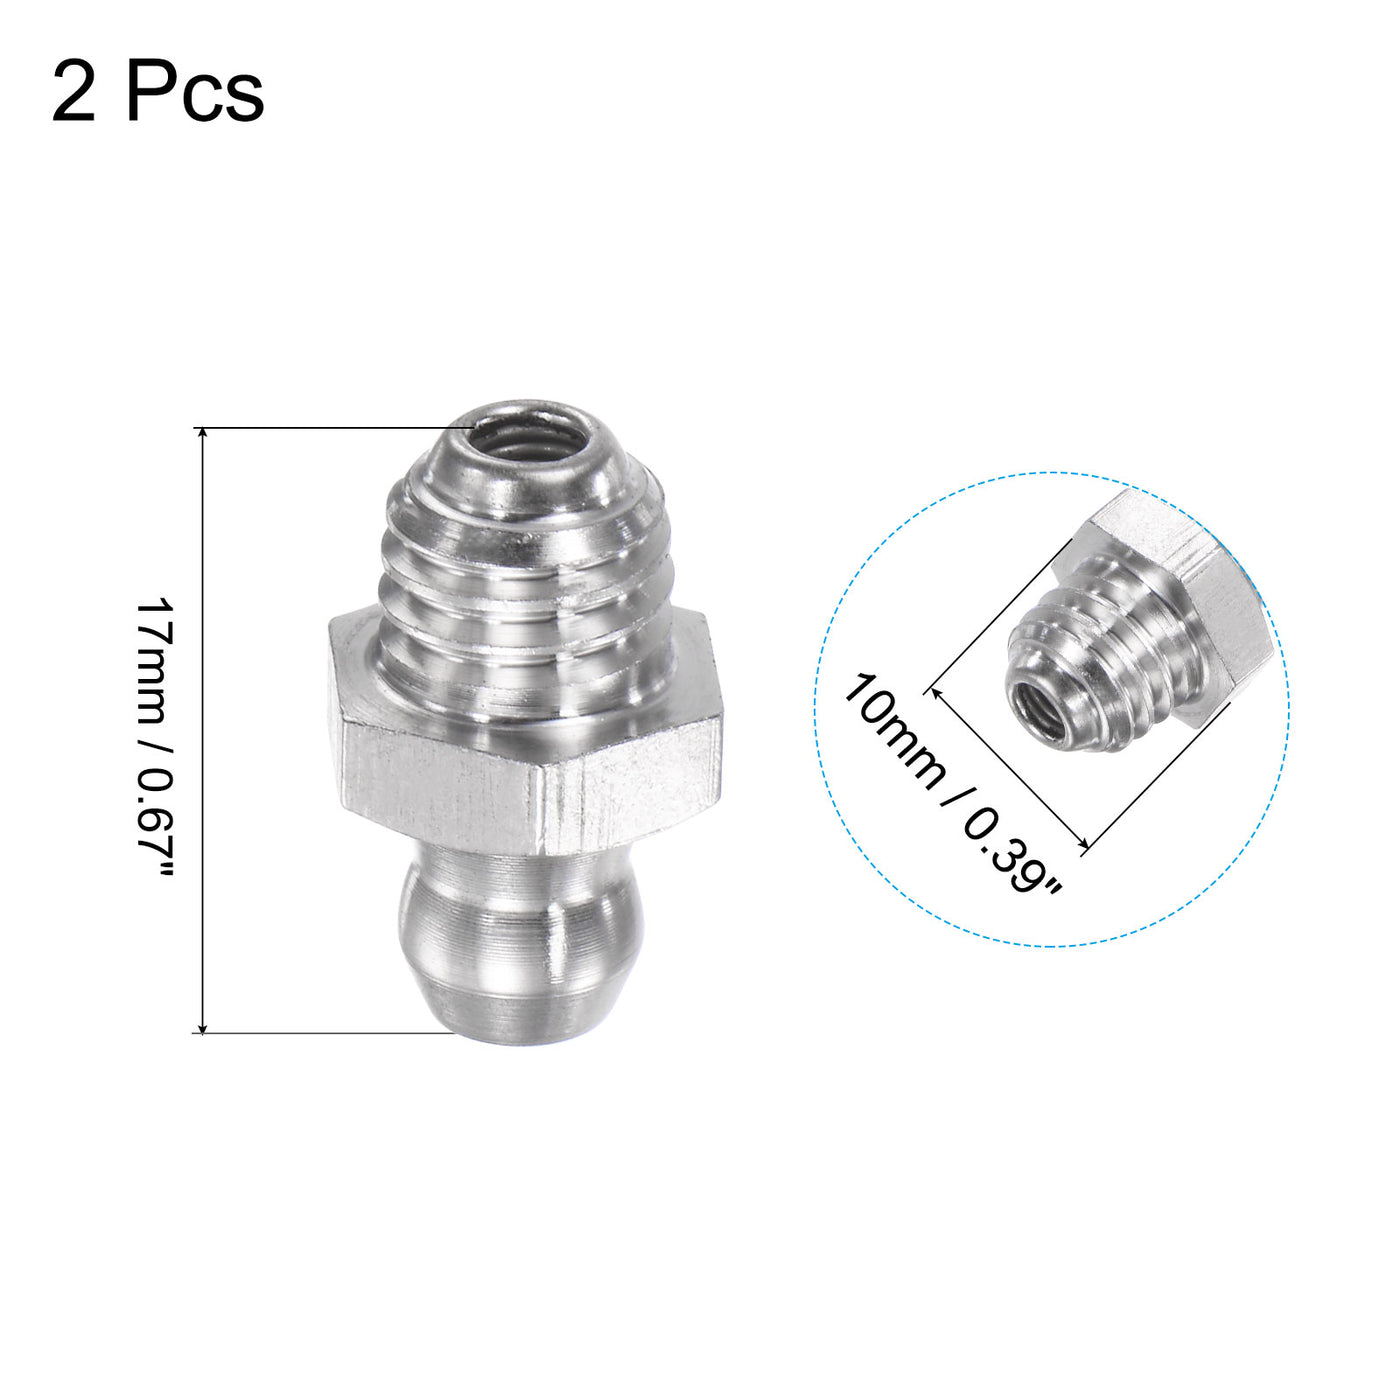 uxcell Uxcell 2Pcs Metric Stainless Steel Straight Hydraulic Grease Fitting M8 x 1.25mm Thread